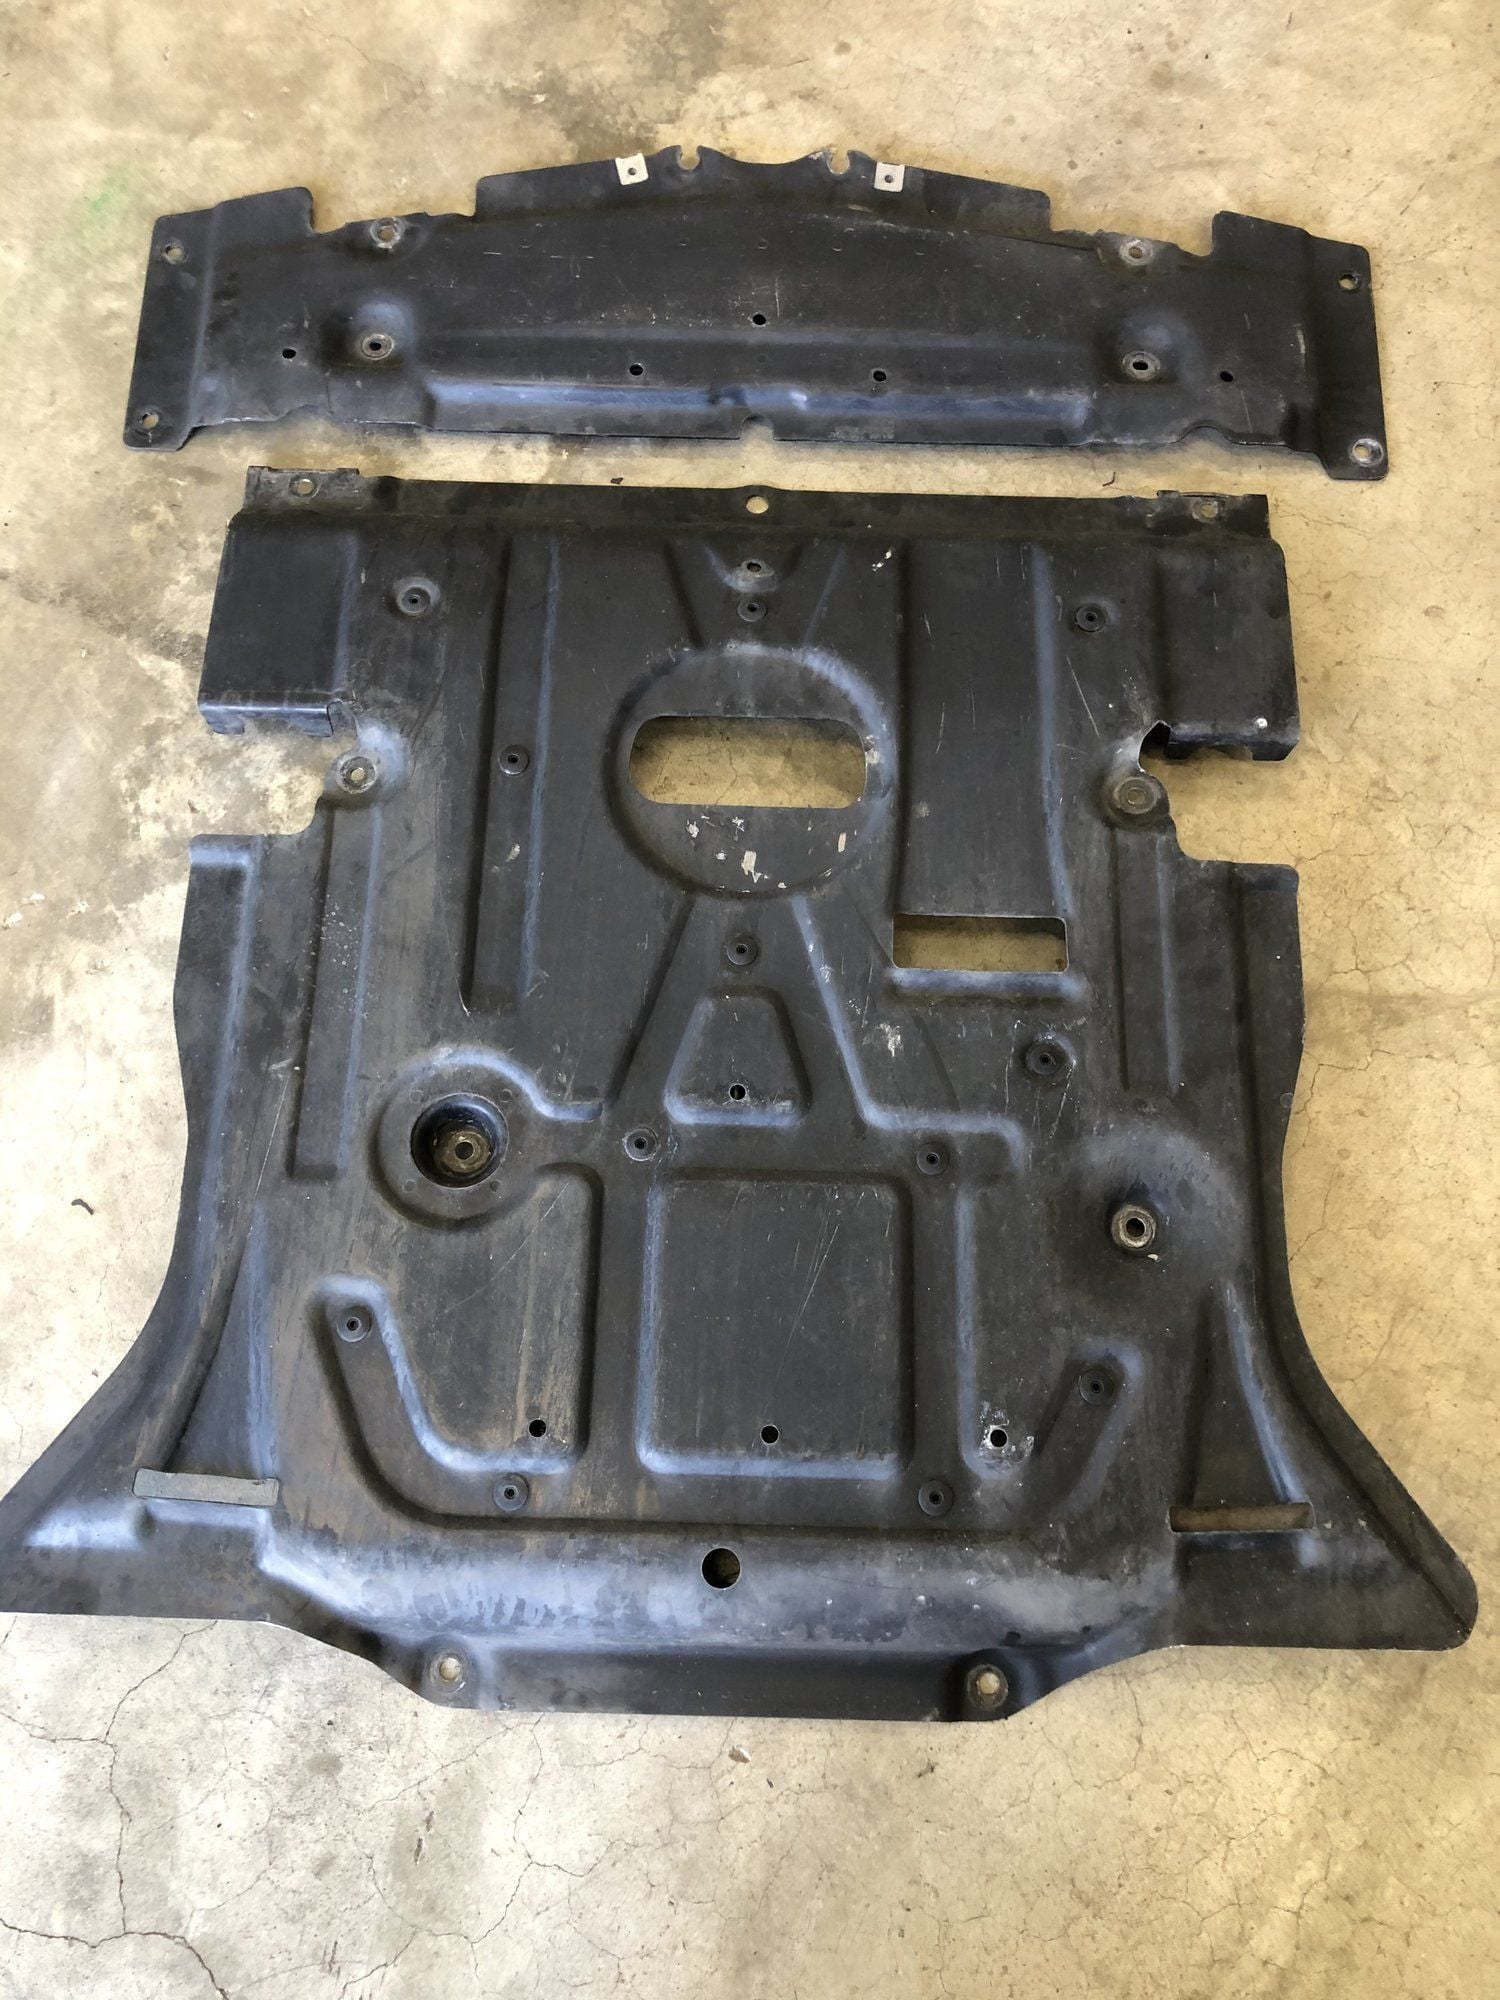 Accessories - Metal Skid Plates - Off Road Package OEM - W166 or X166 (ML/GLE or GL) - Used - 0  All Models - Peoria, IL 61615, United States